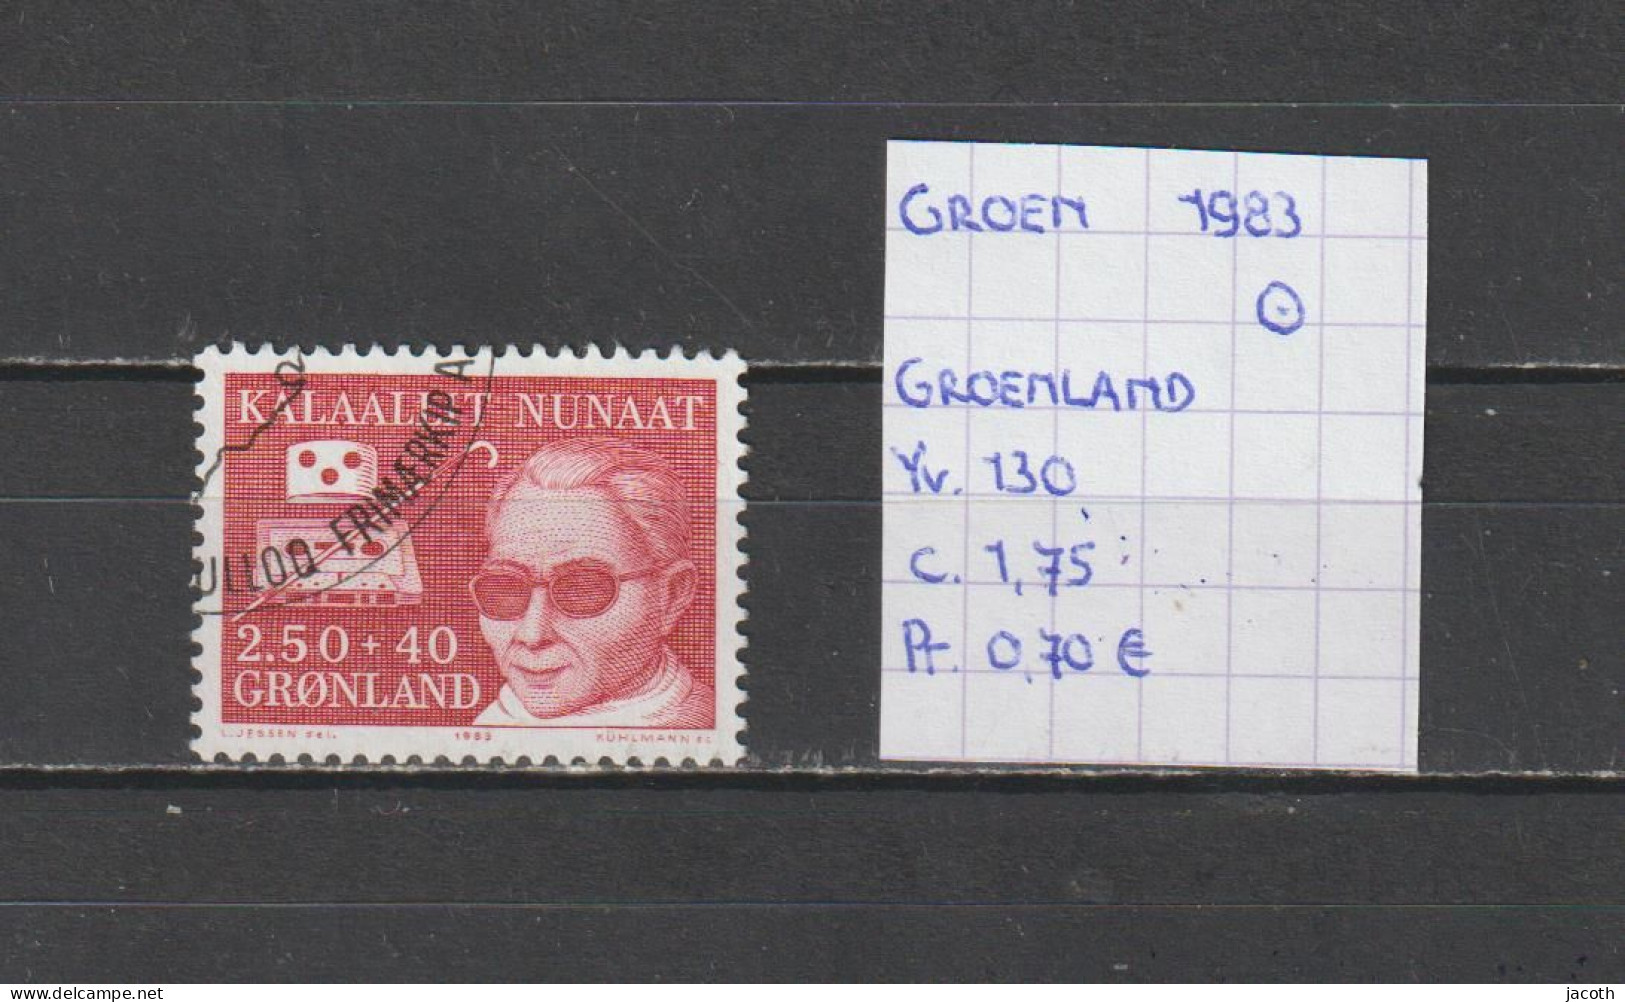 (TJ) Groenland 1983 - YT 130 (gest./obl./used) - Used Stamps